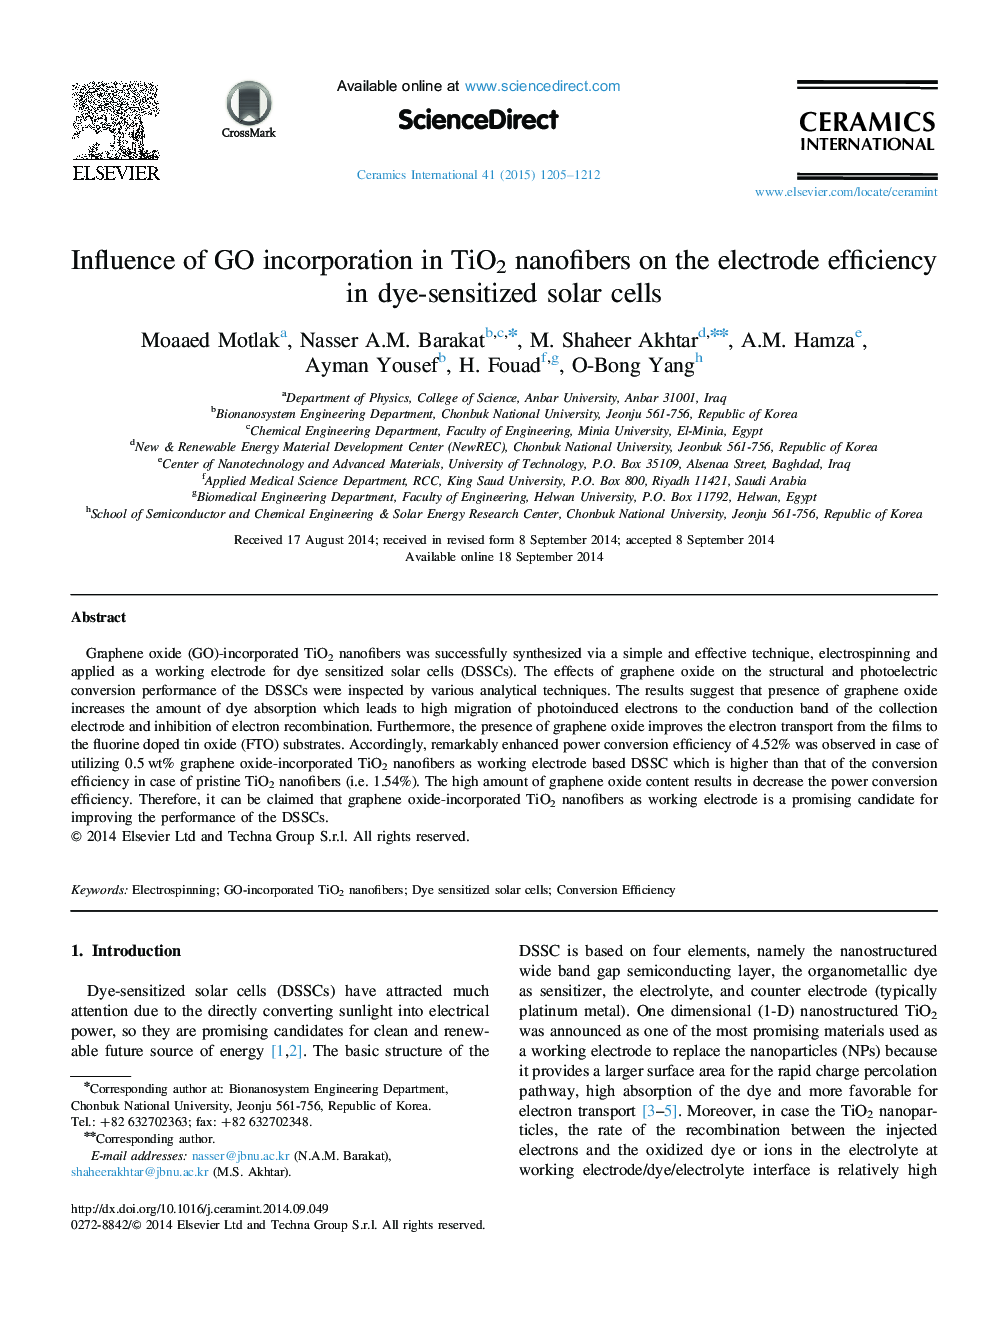 Influence of GO incorporation in TiO2 nanofibers on the electrode efficiency in dye-sensitized solar cells